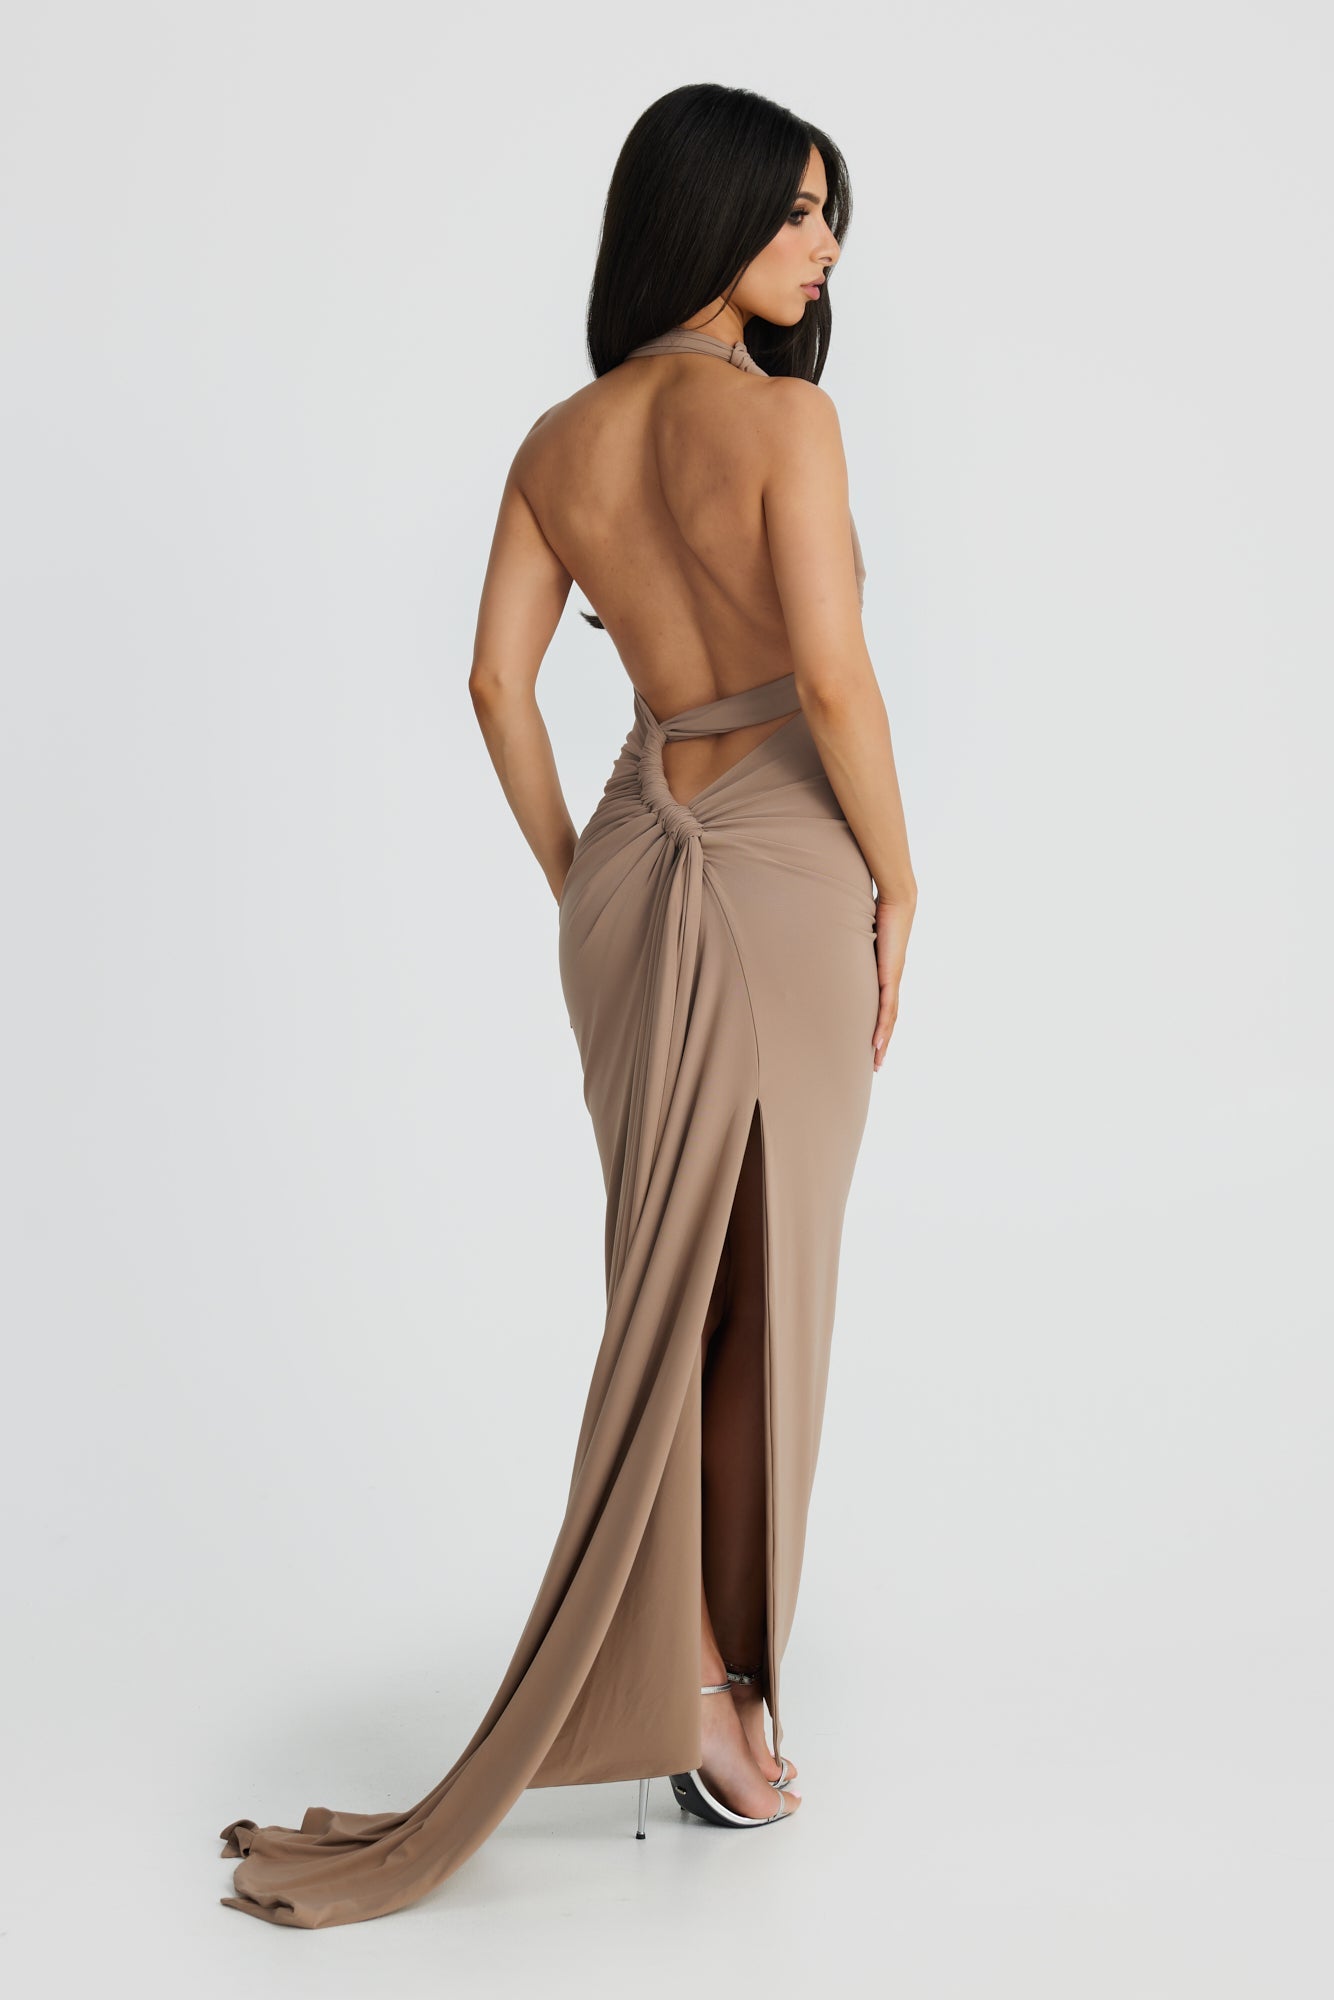 MÉLANI The Label IVANA Latte Multi Tie Fitted Formal Dress